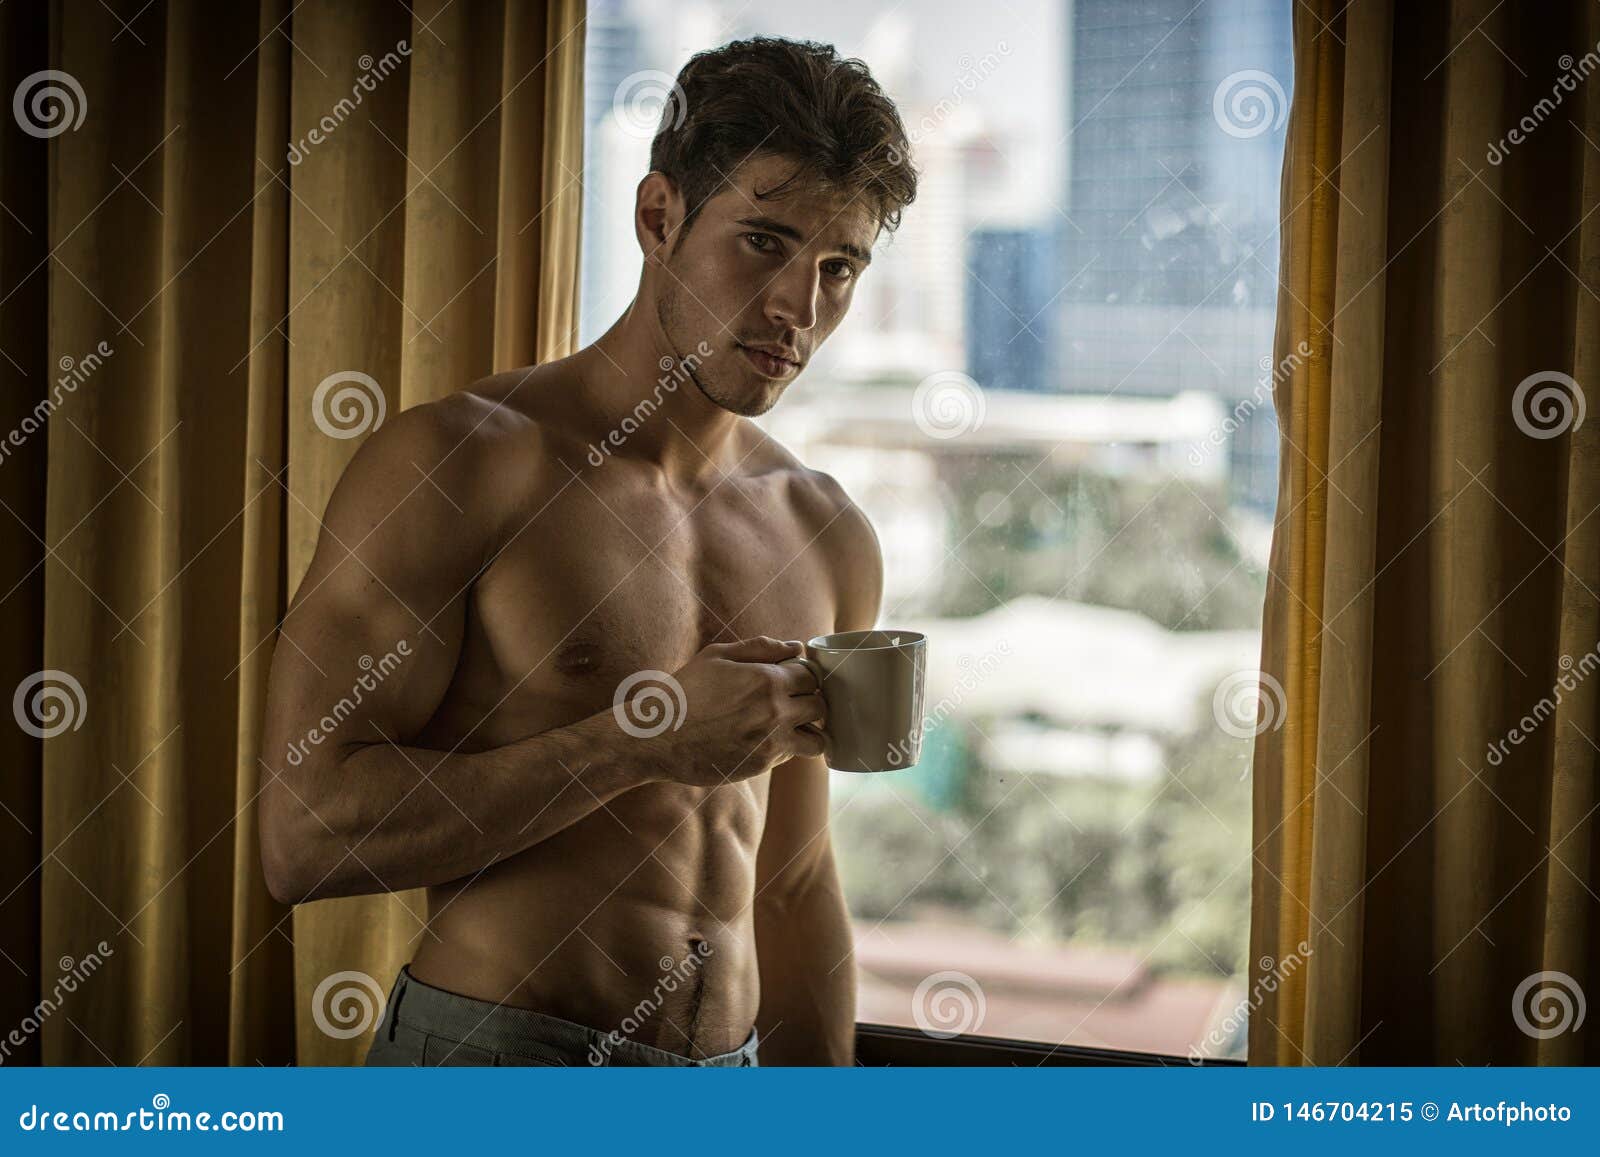 sexy young man standing shirtless by curtains with coffee